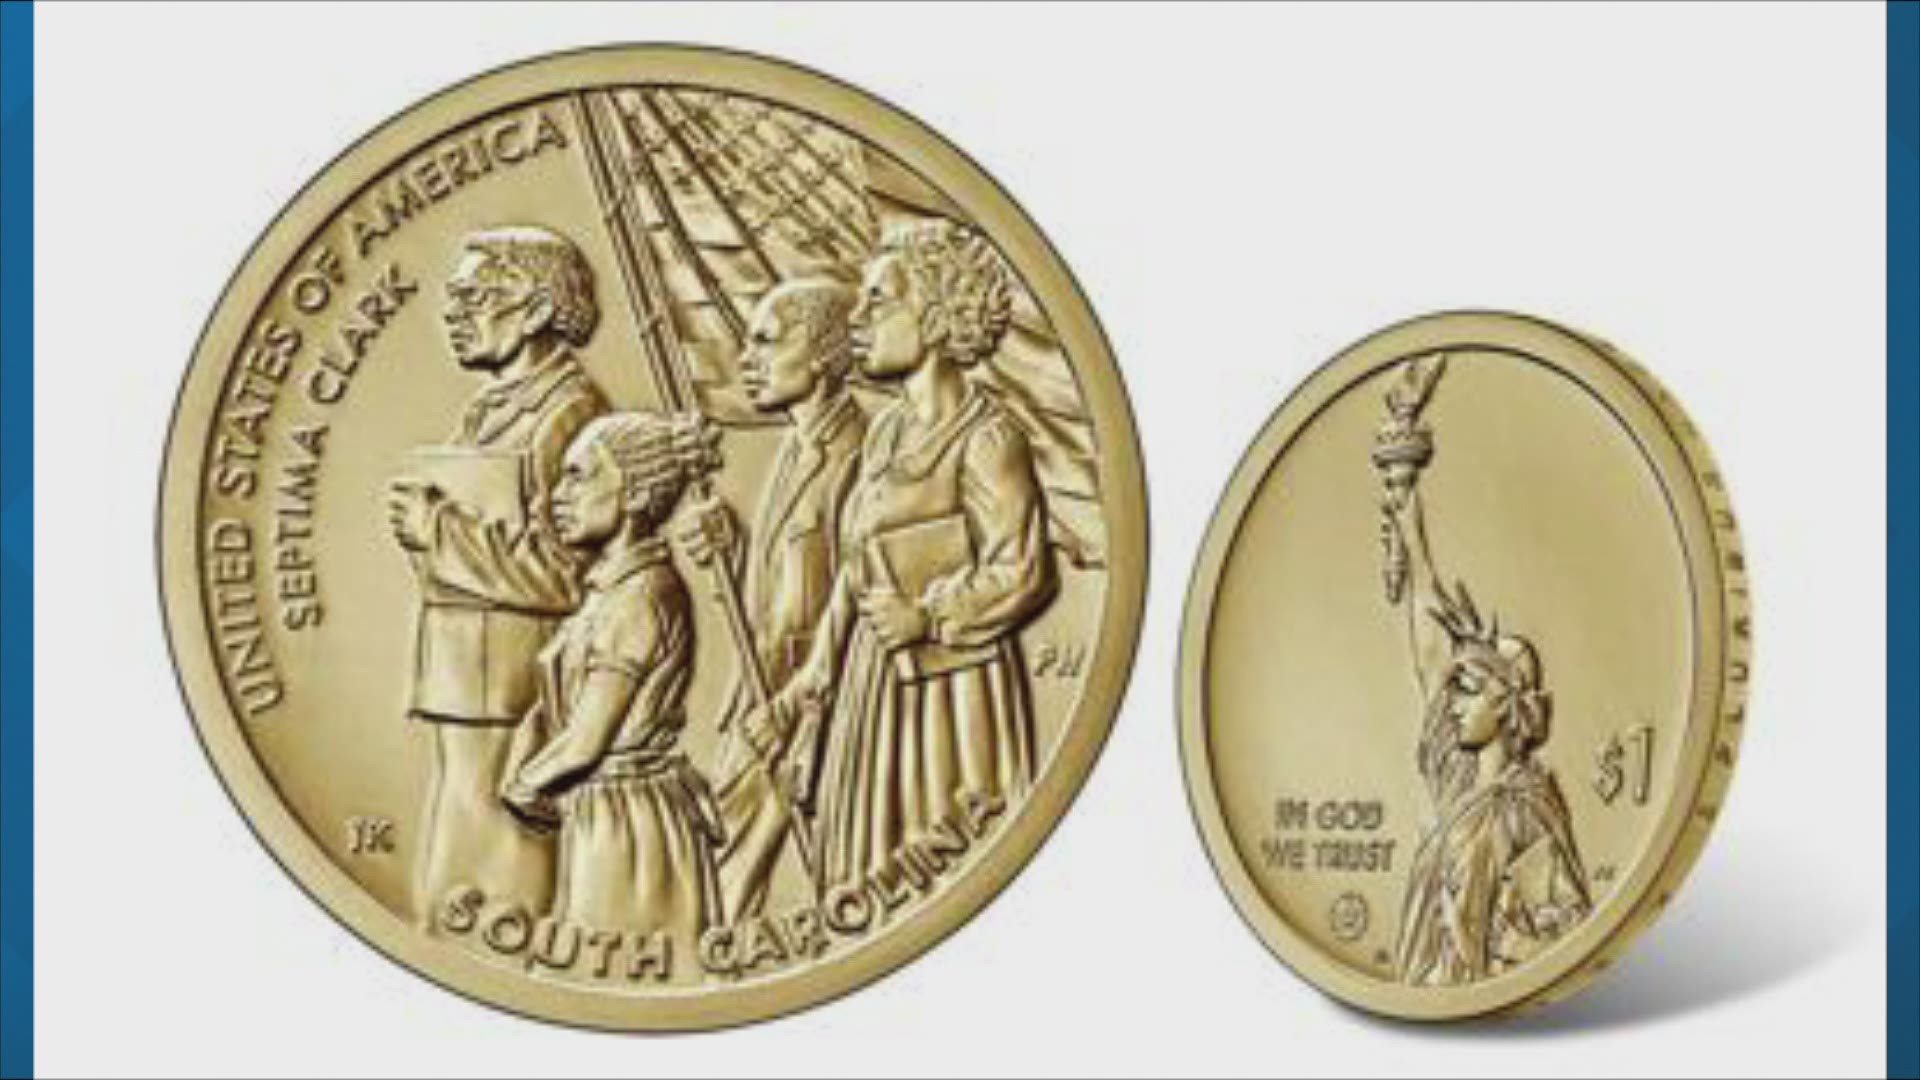 The $1 coin depicts Septima Poinsette Clark marching with three Black students carrying books and an American flag.